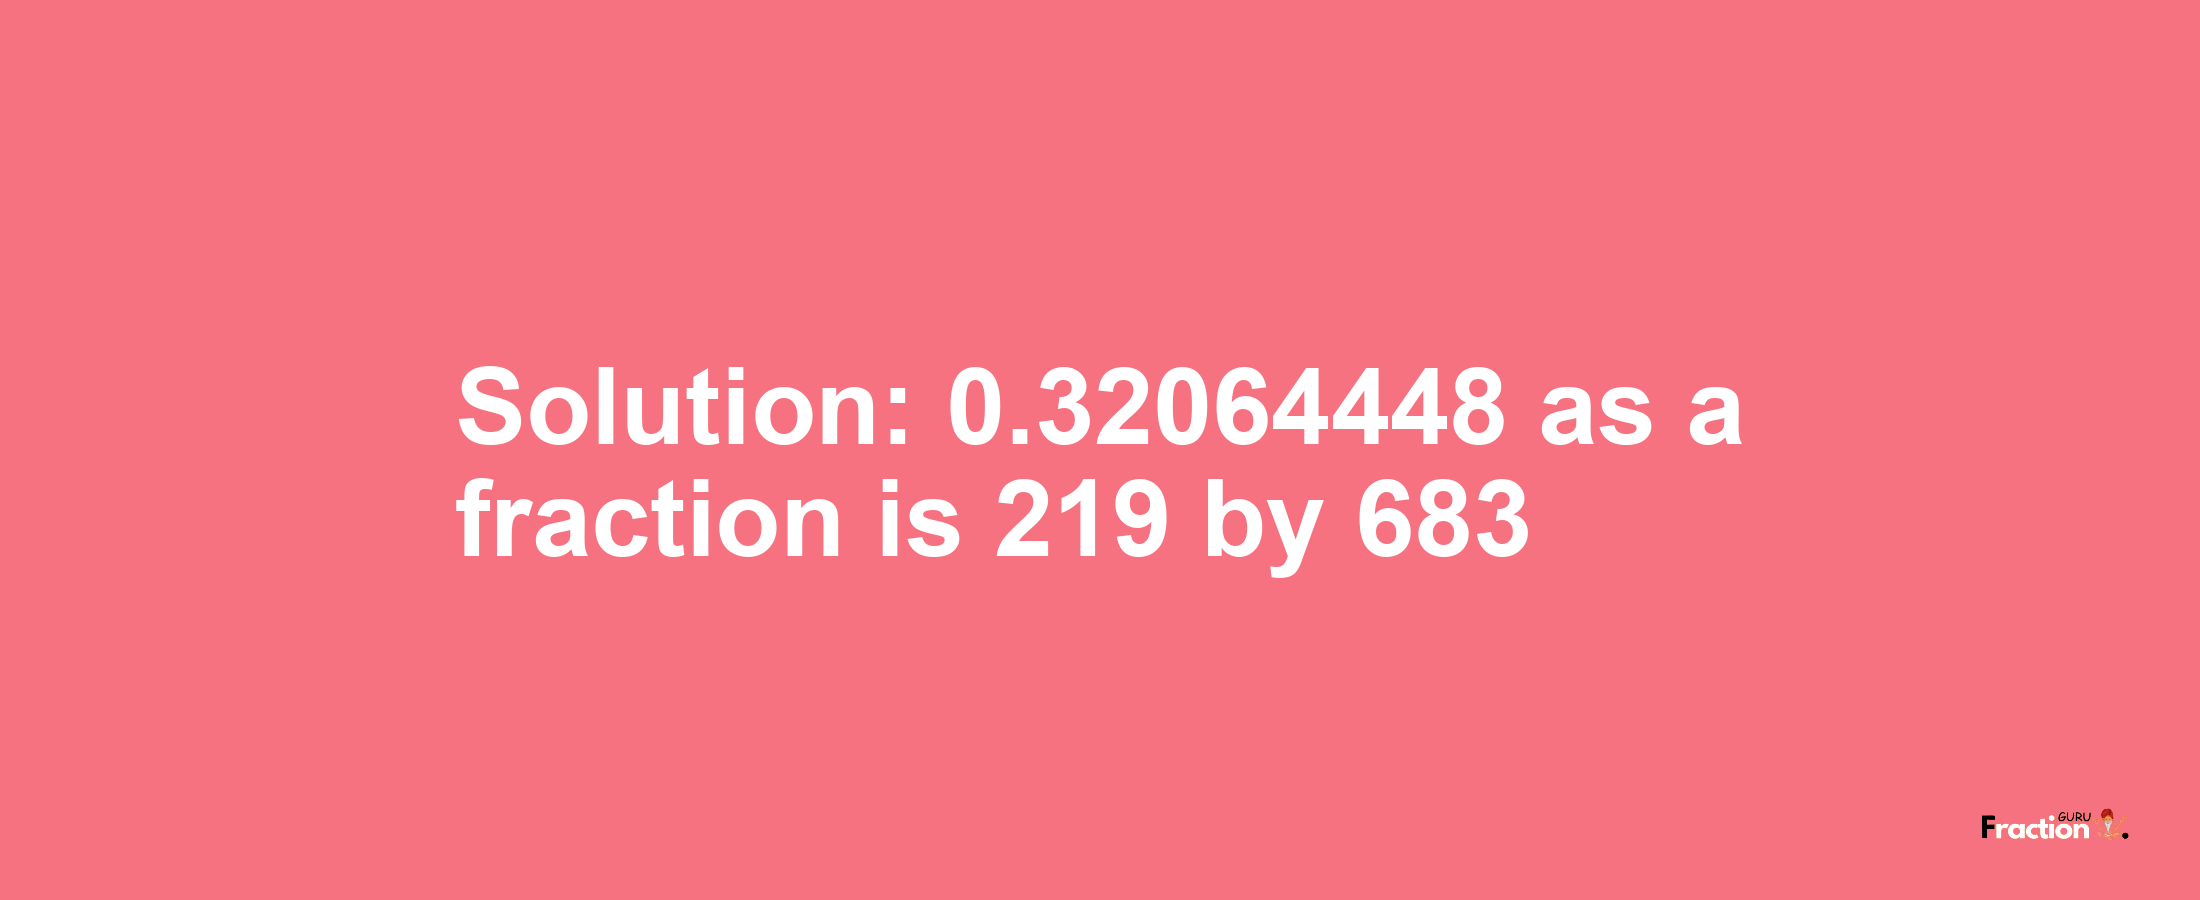 Solution:0.32064448 as a fraction is 219/683